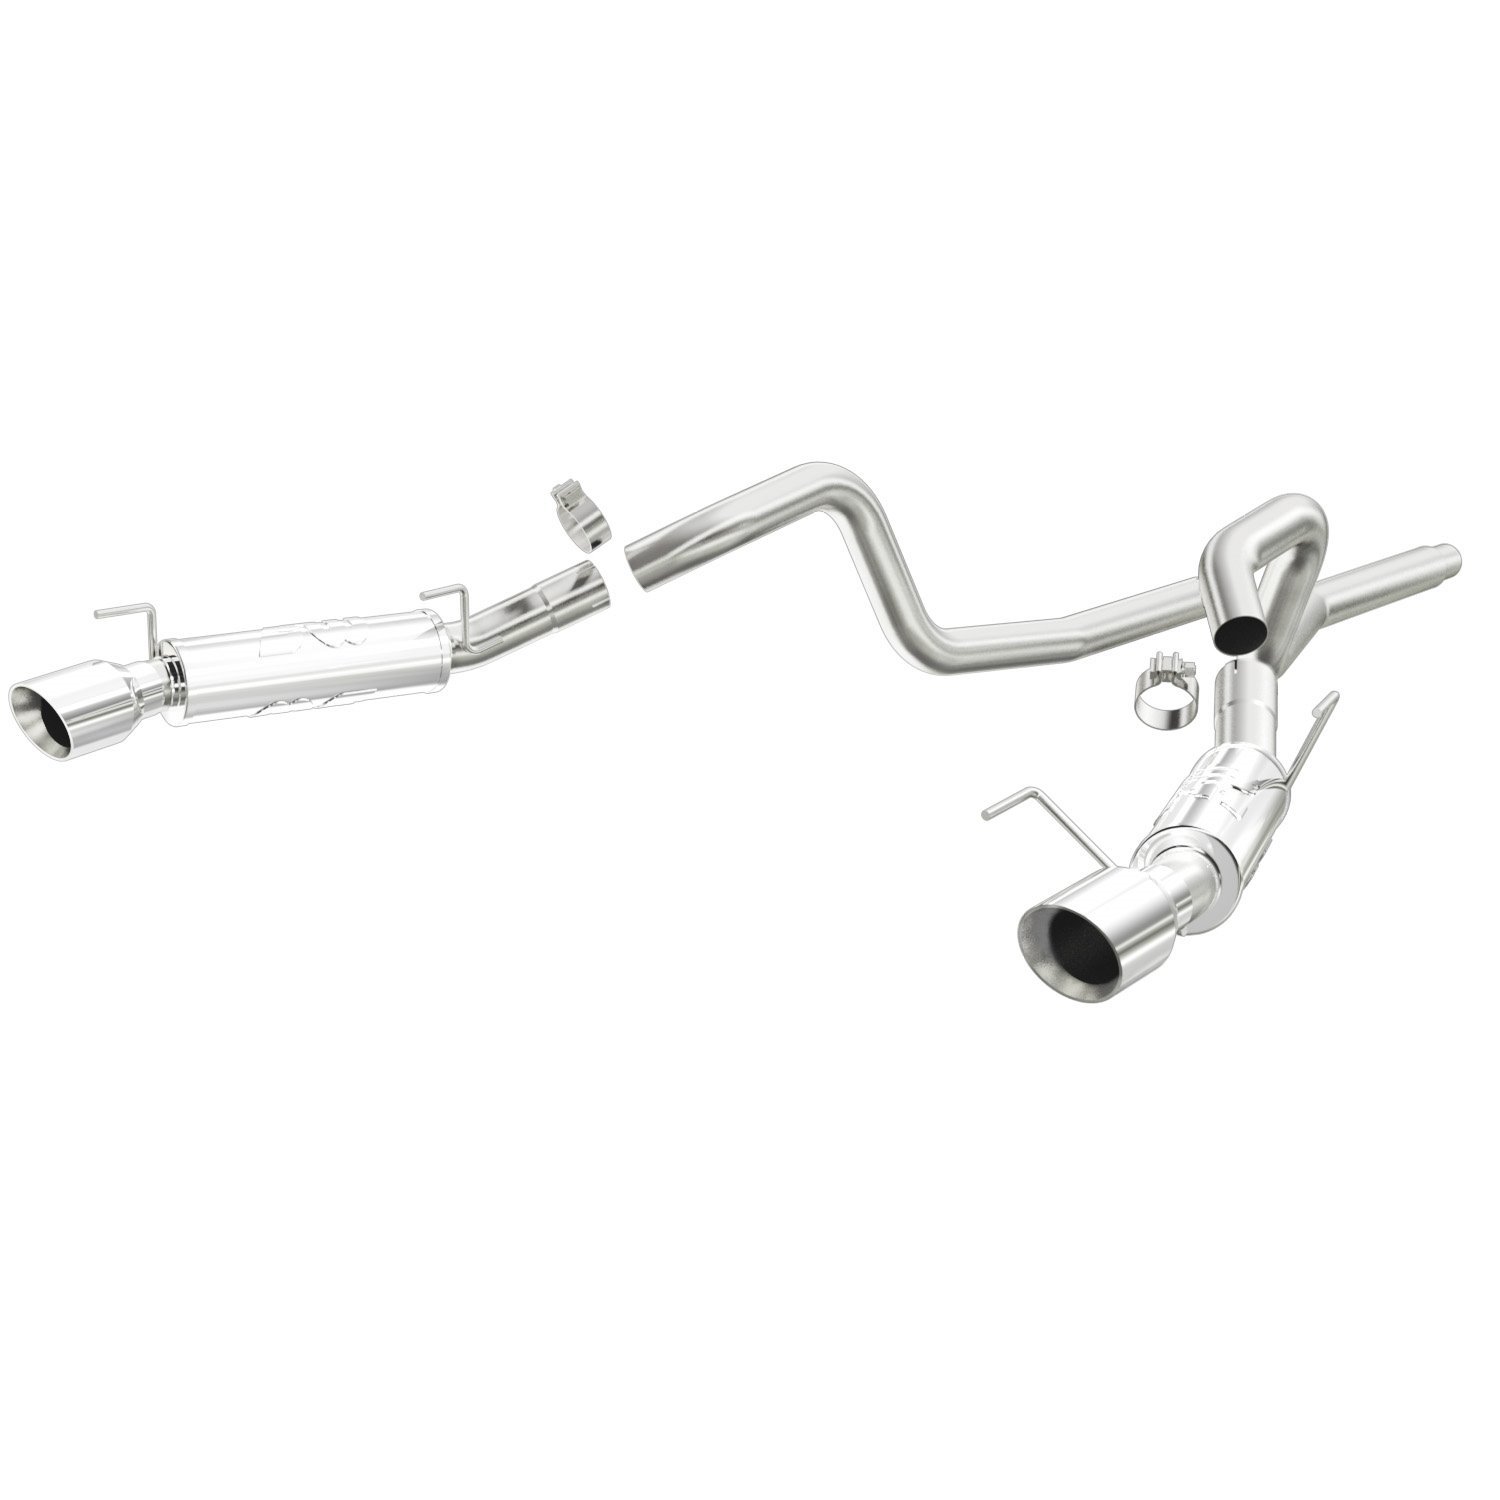 Competition Series Cat-Back Exhaust System 2005-2009 Mustang GT 4.6L/5.4L V8